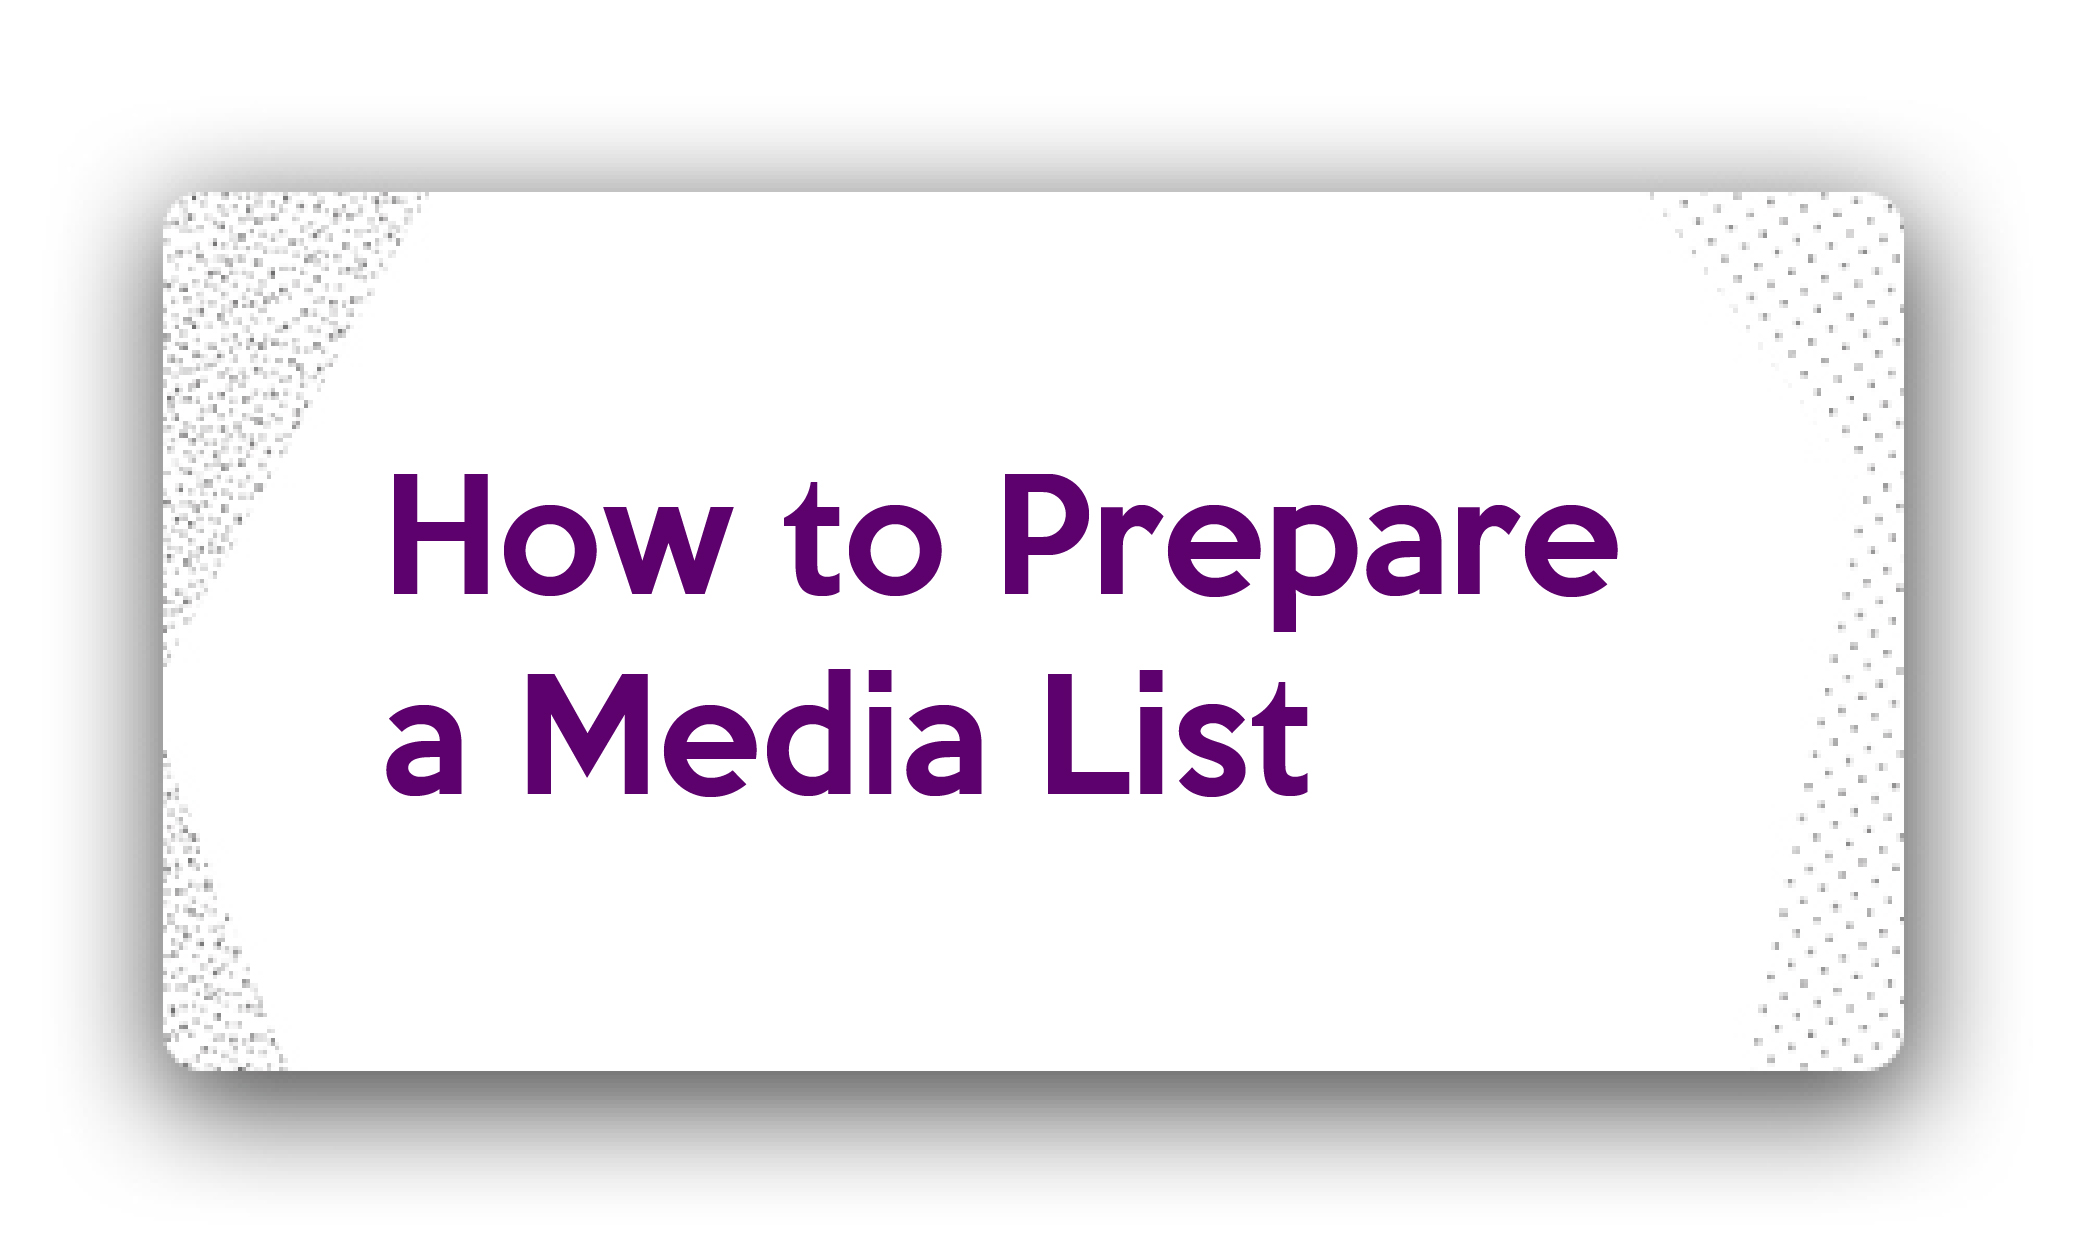 Title- How to Prepare a Media List